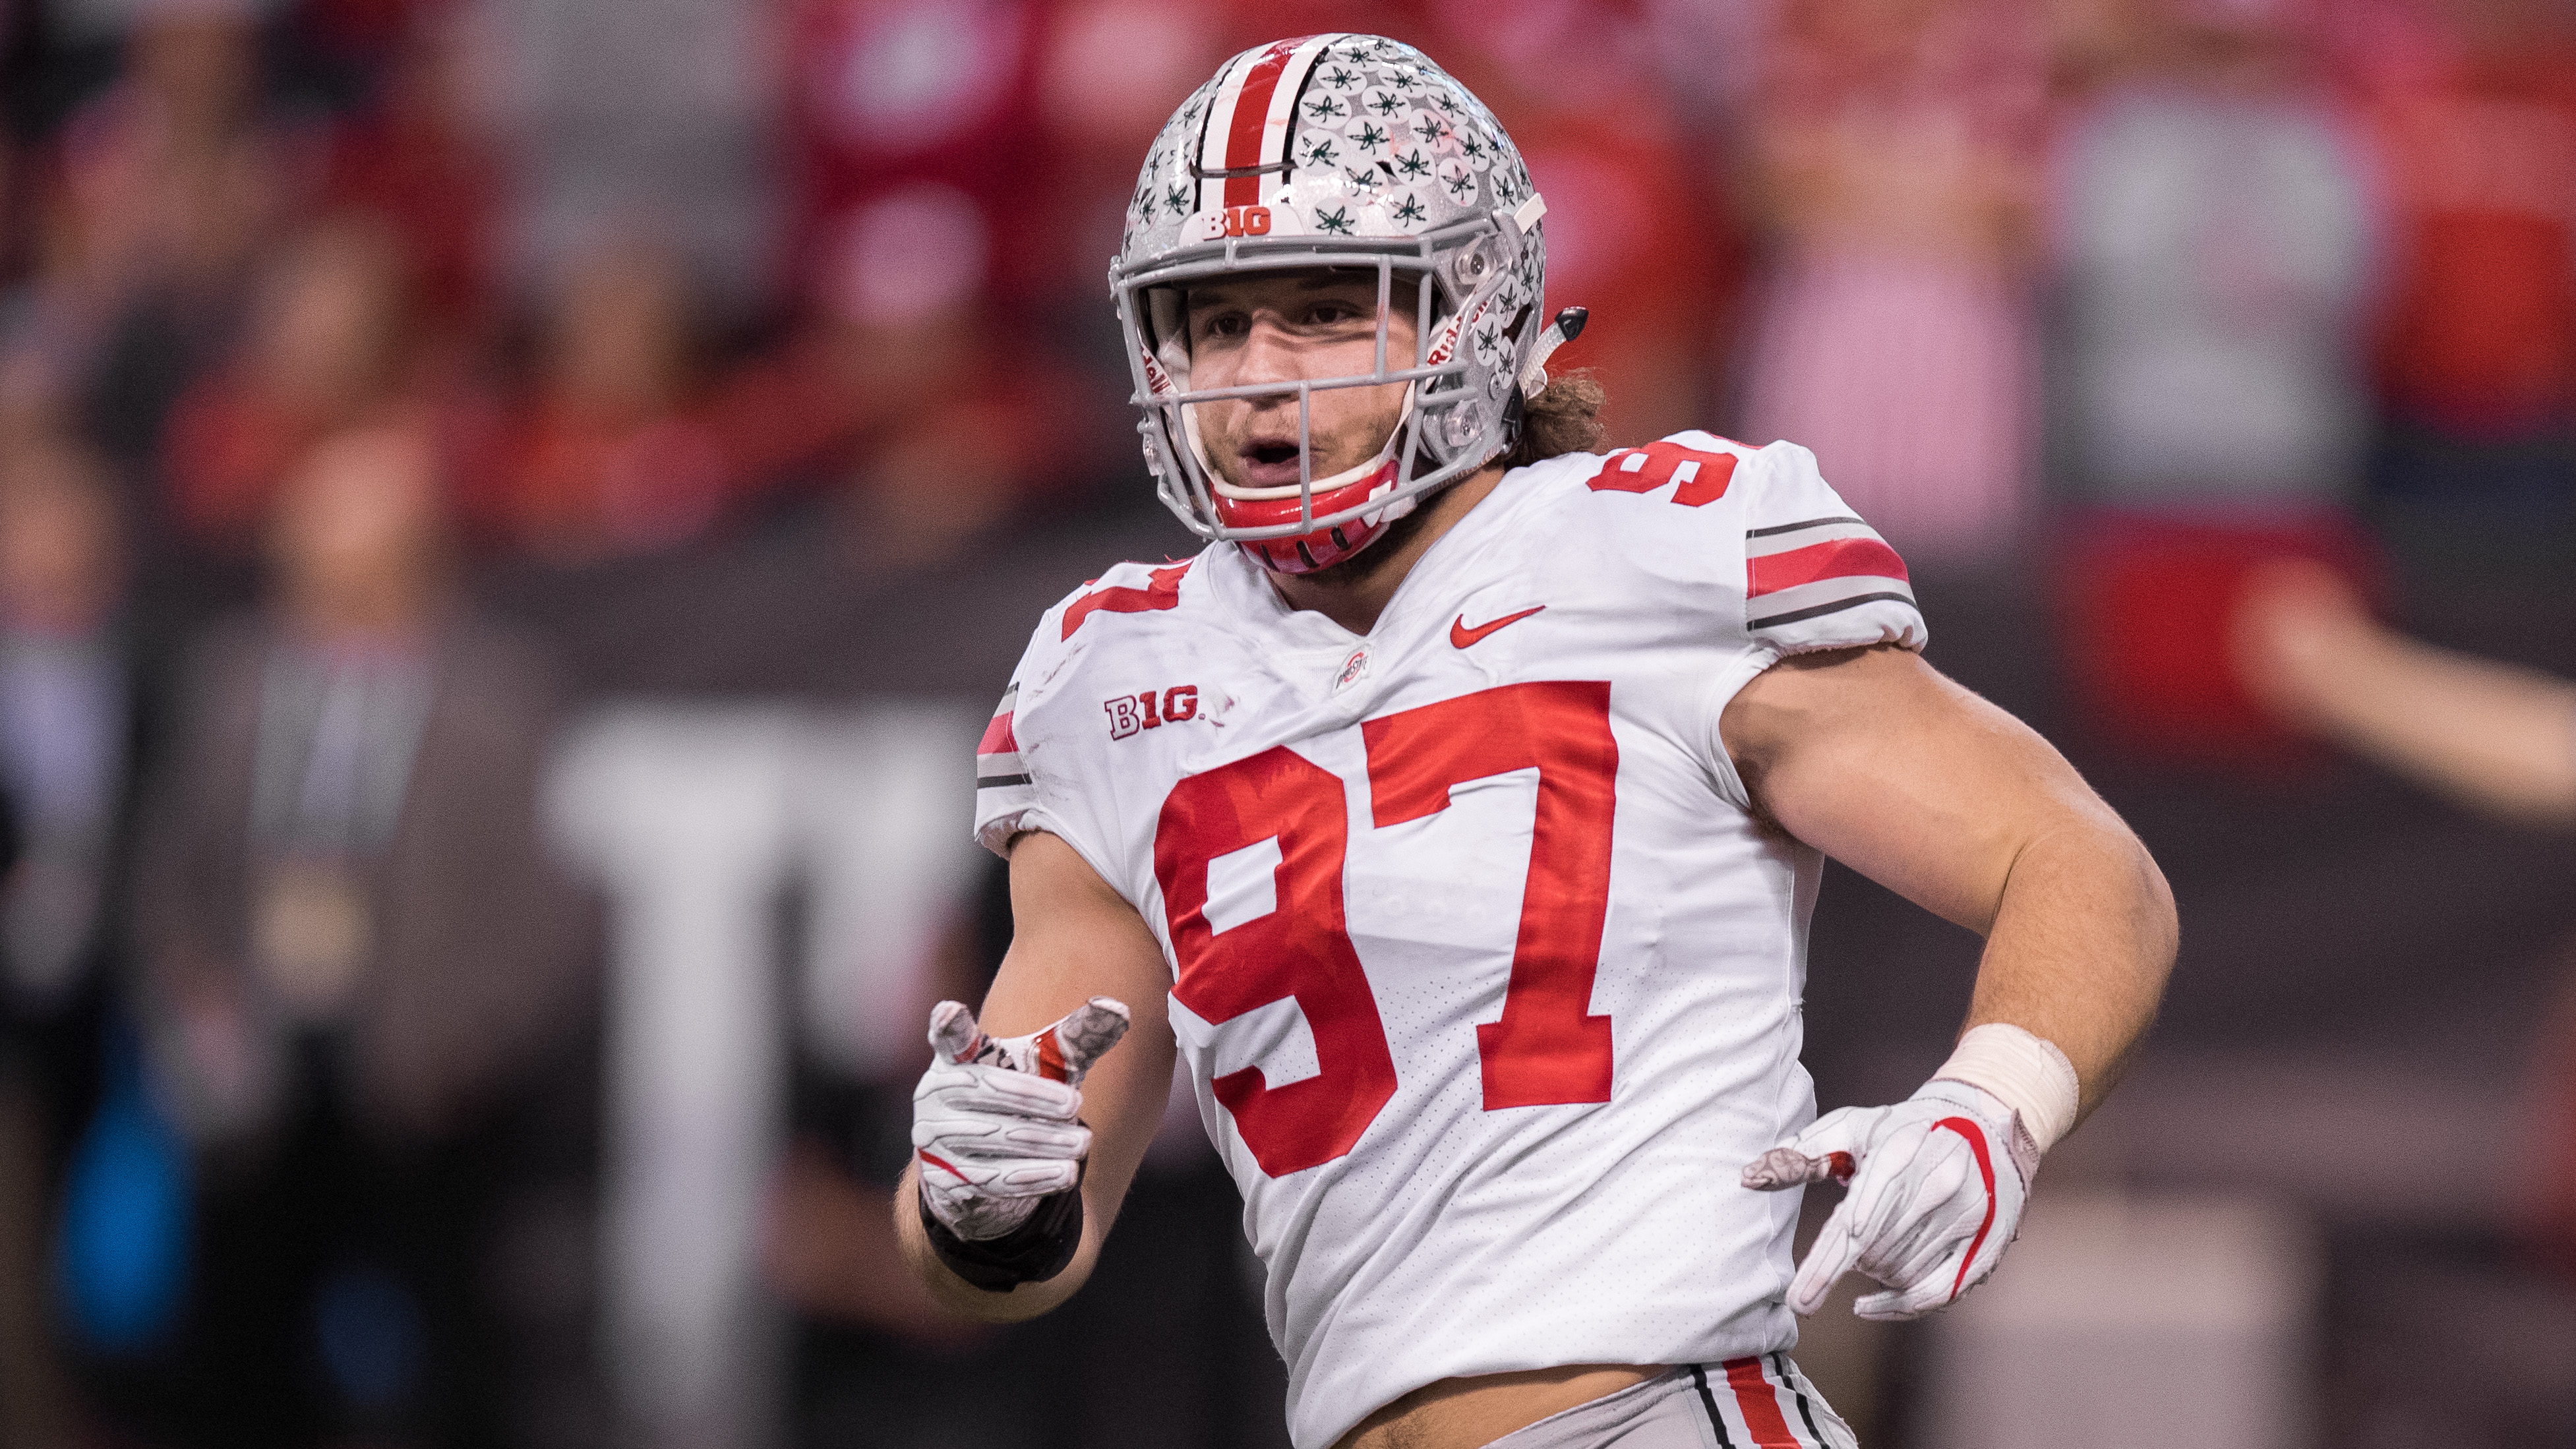 Scouting Blog – DL Scouting Notes for 2019 NFL Draft